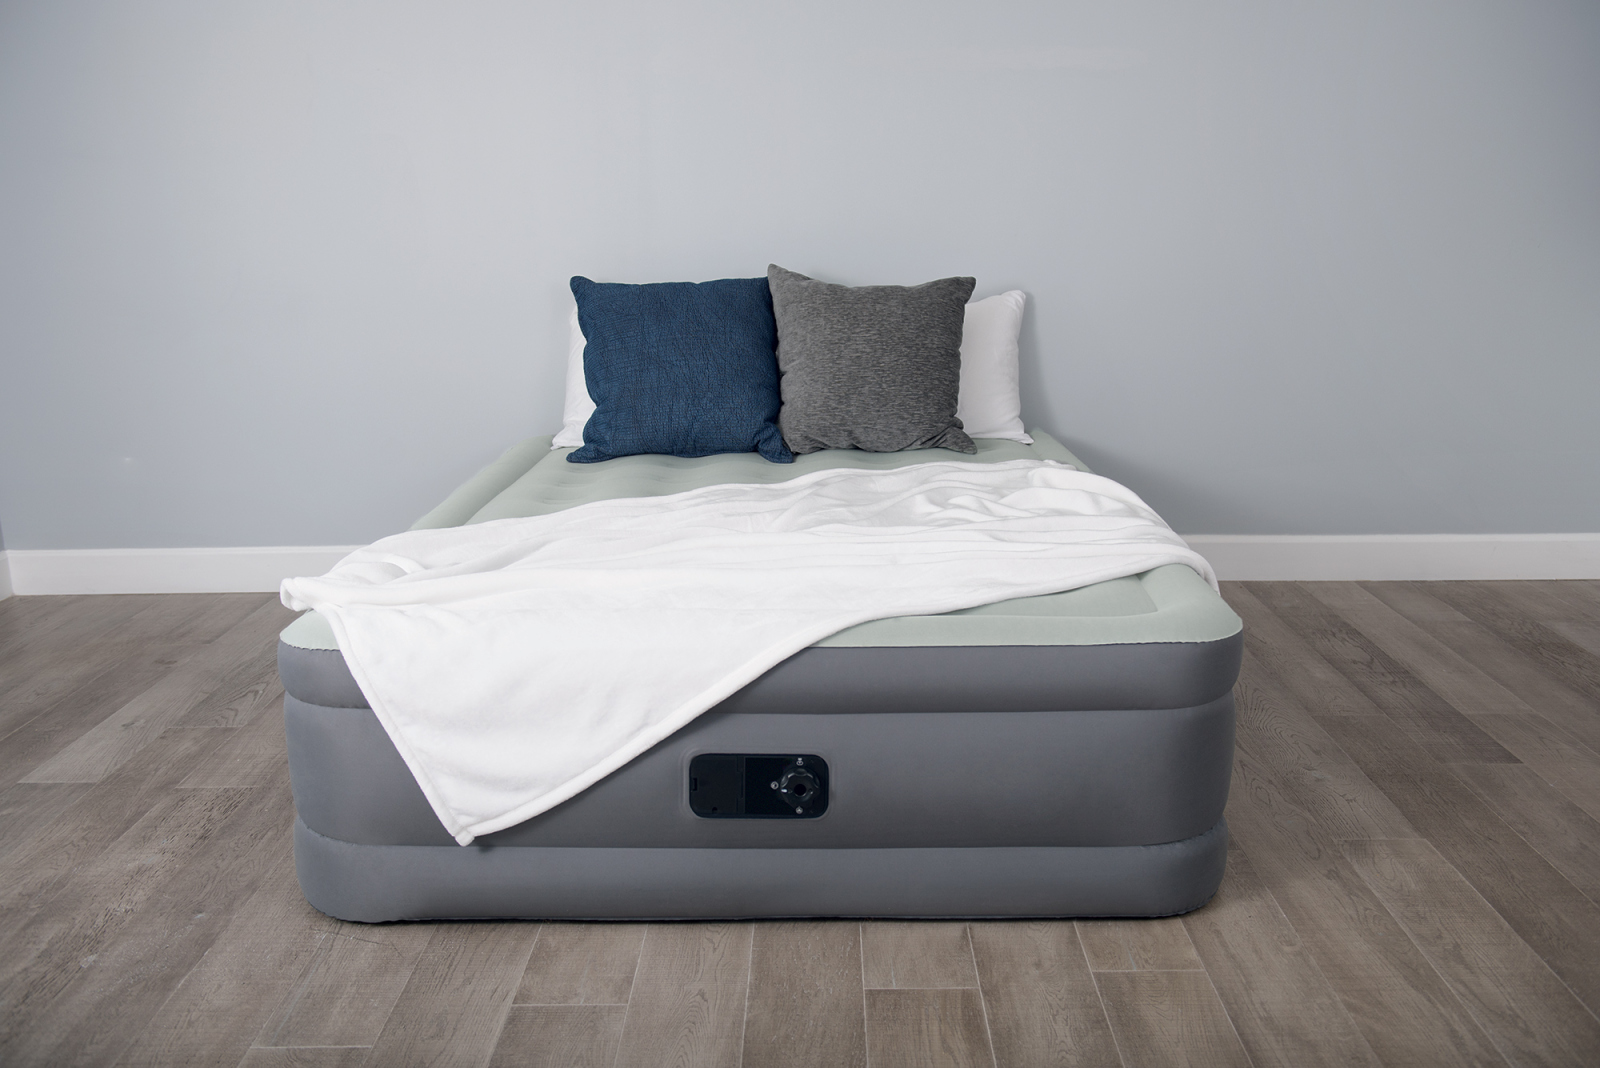 Bestway Airbed with Built-In Electric Pump - image 3 of 3